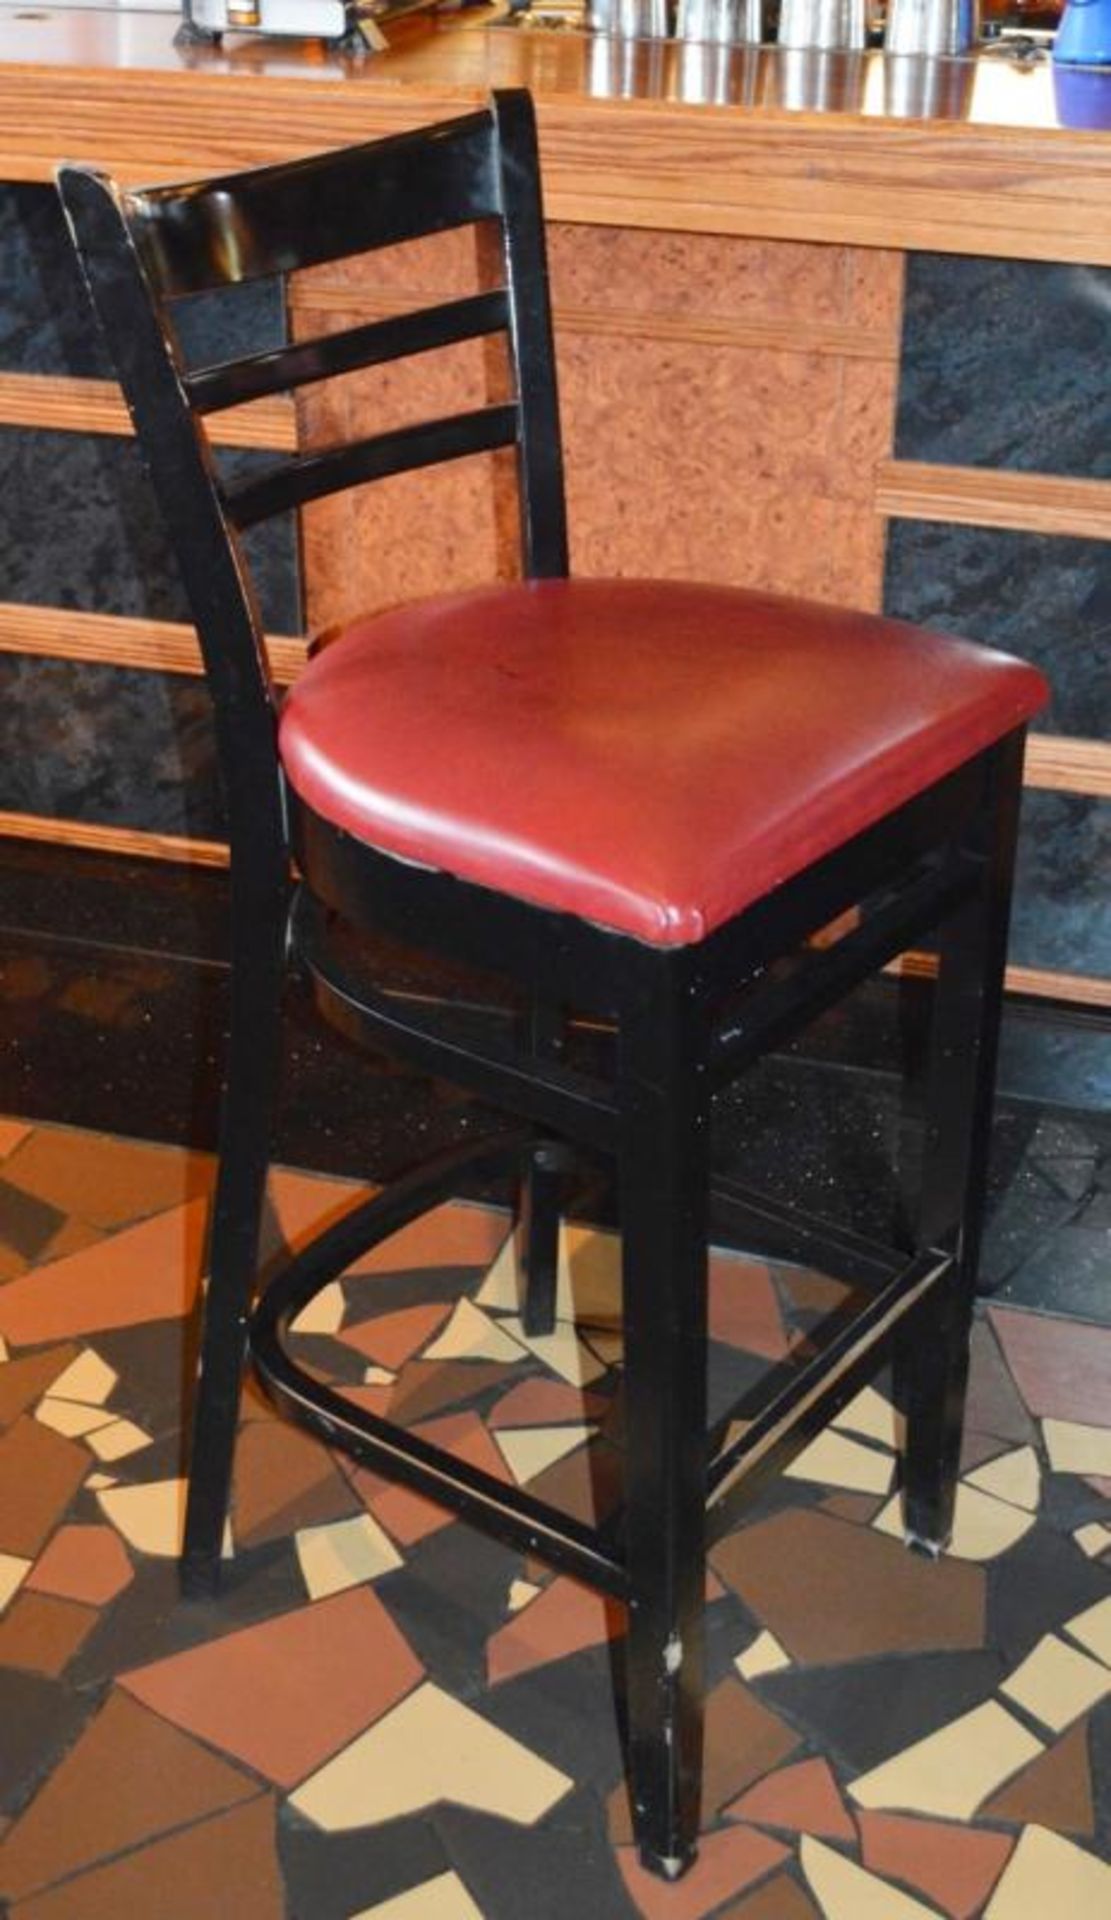 8 x Ladderback Bar Stools in Black and Cream and Red Faux Leather Seat Pads - CL357 - Location: Bolt - Image 3 of 9